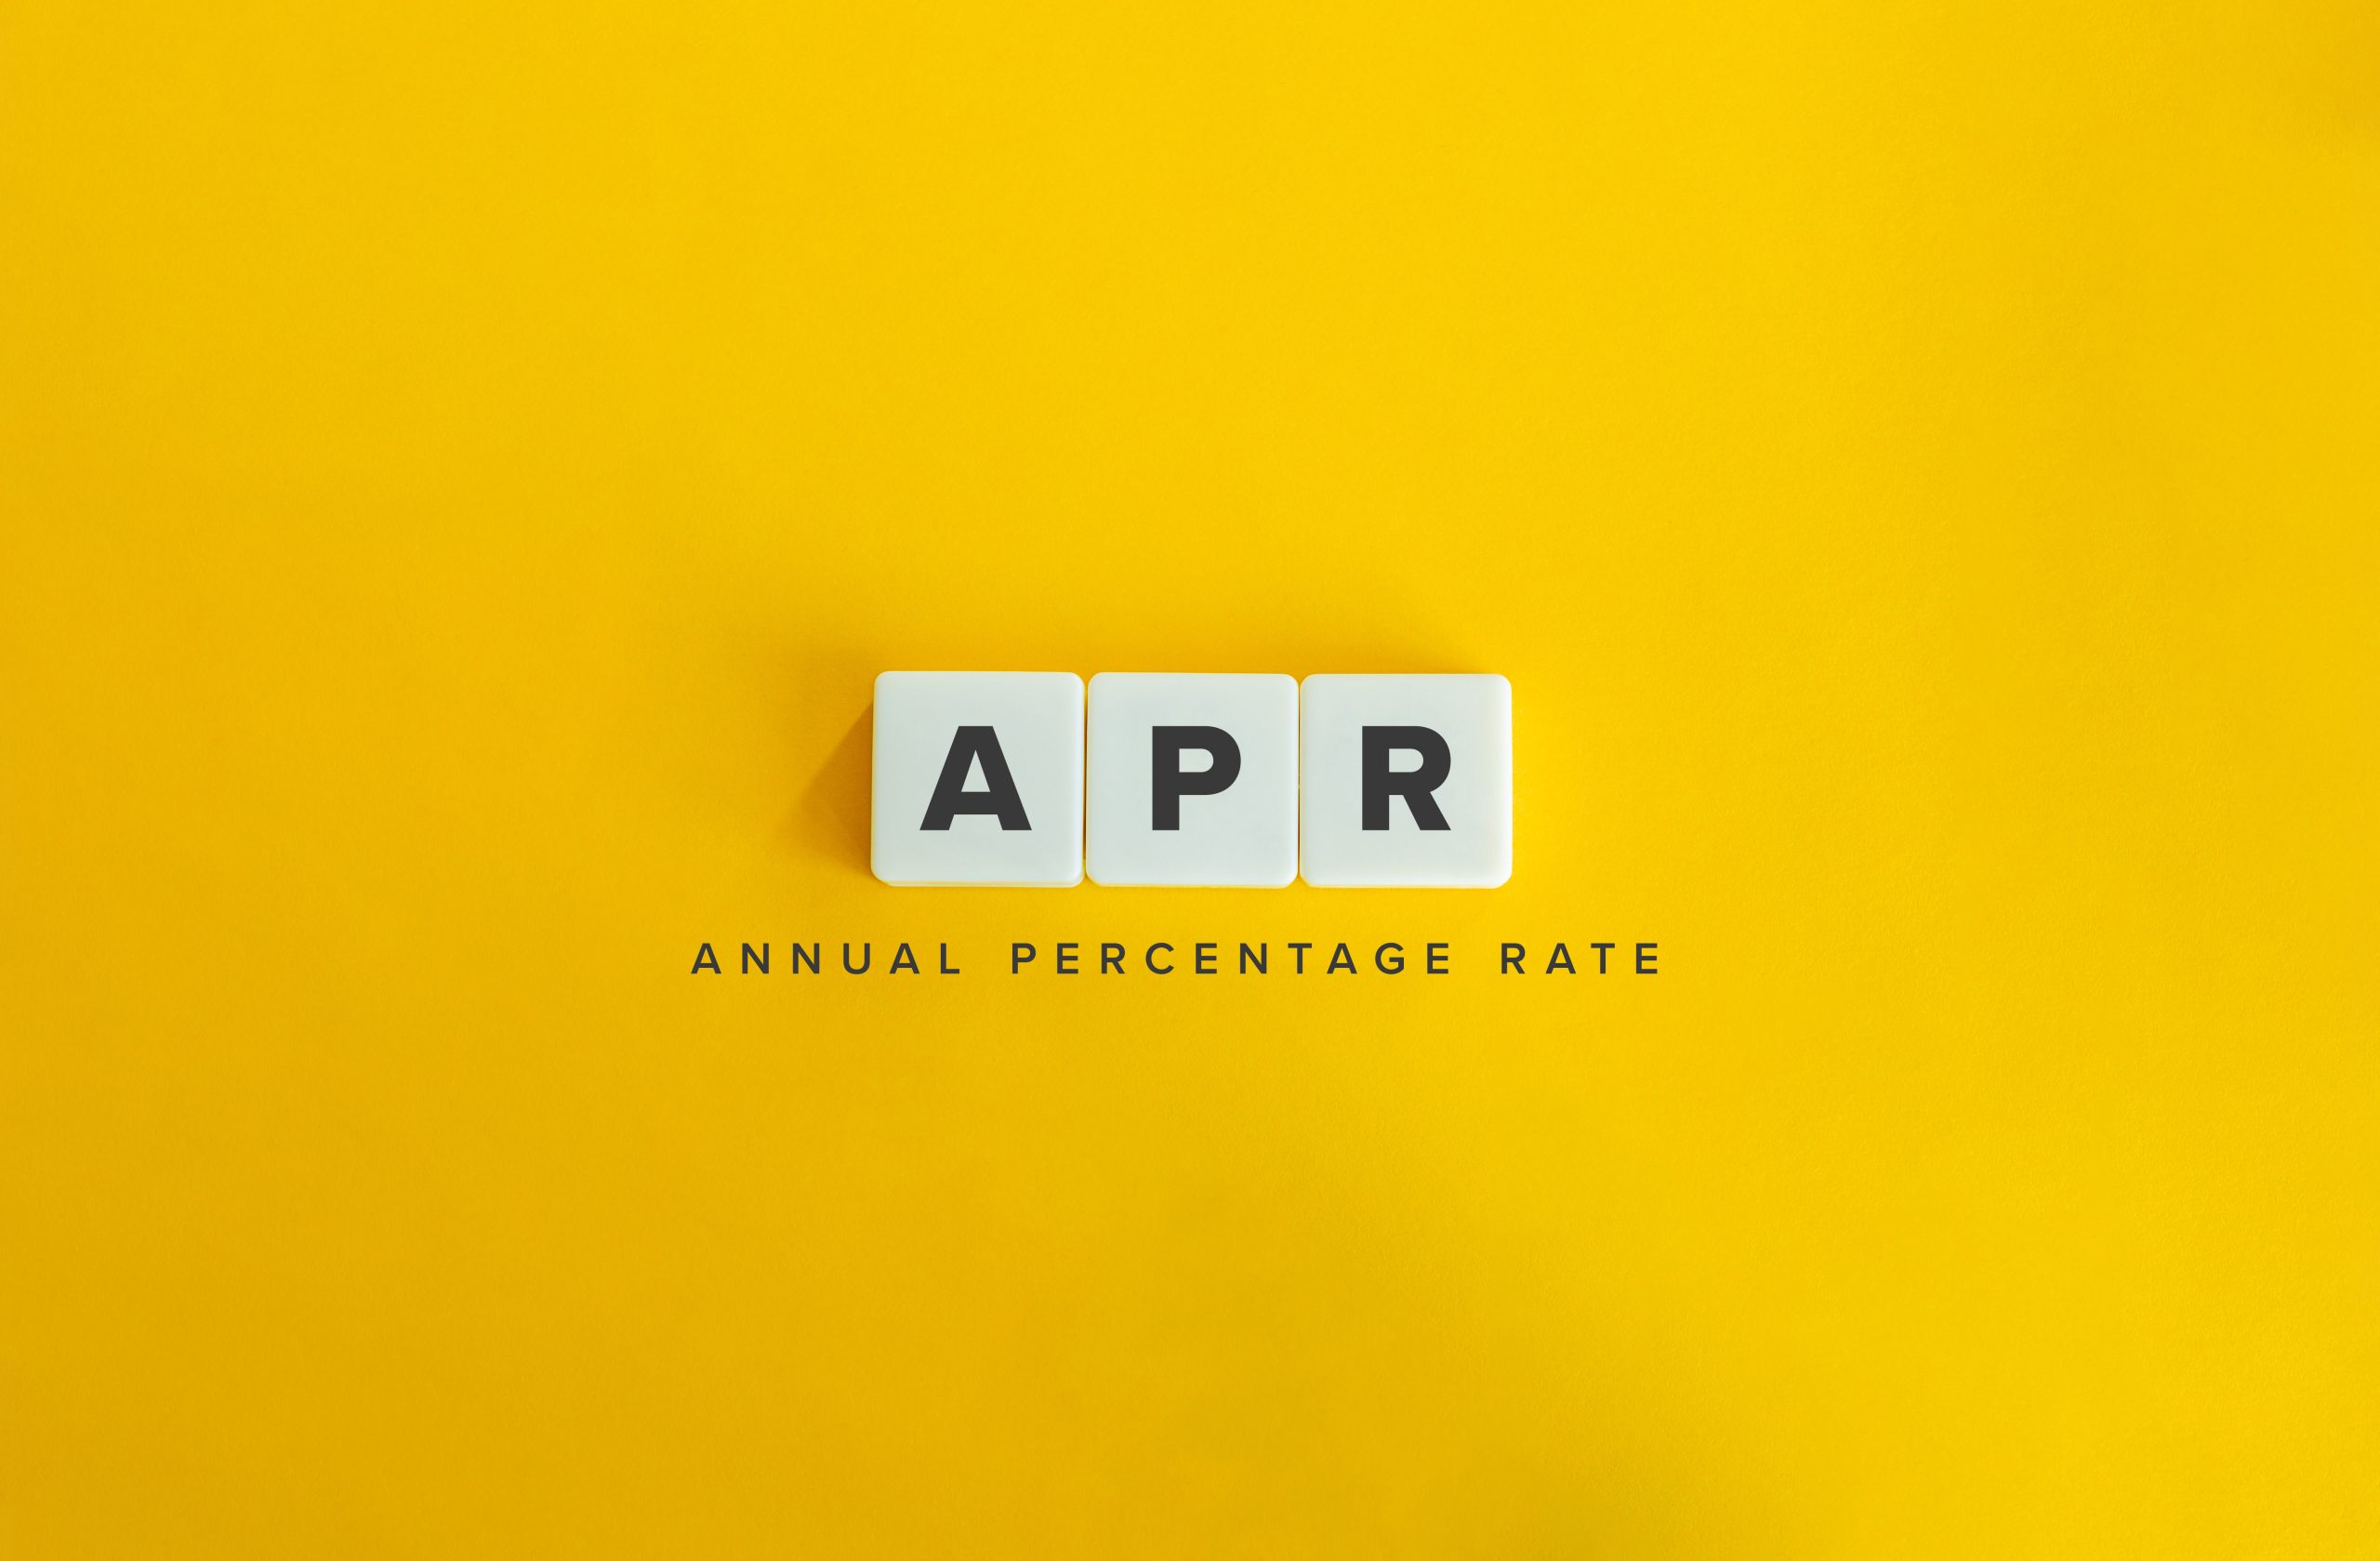 Annual Percentage Rate (APR) Banner. Letter Tiles on Yellow Background. Minimal Aesthetics.